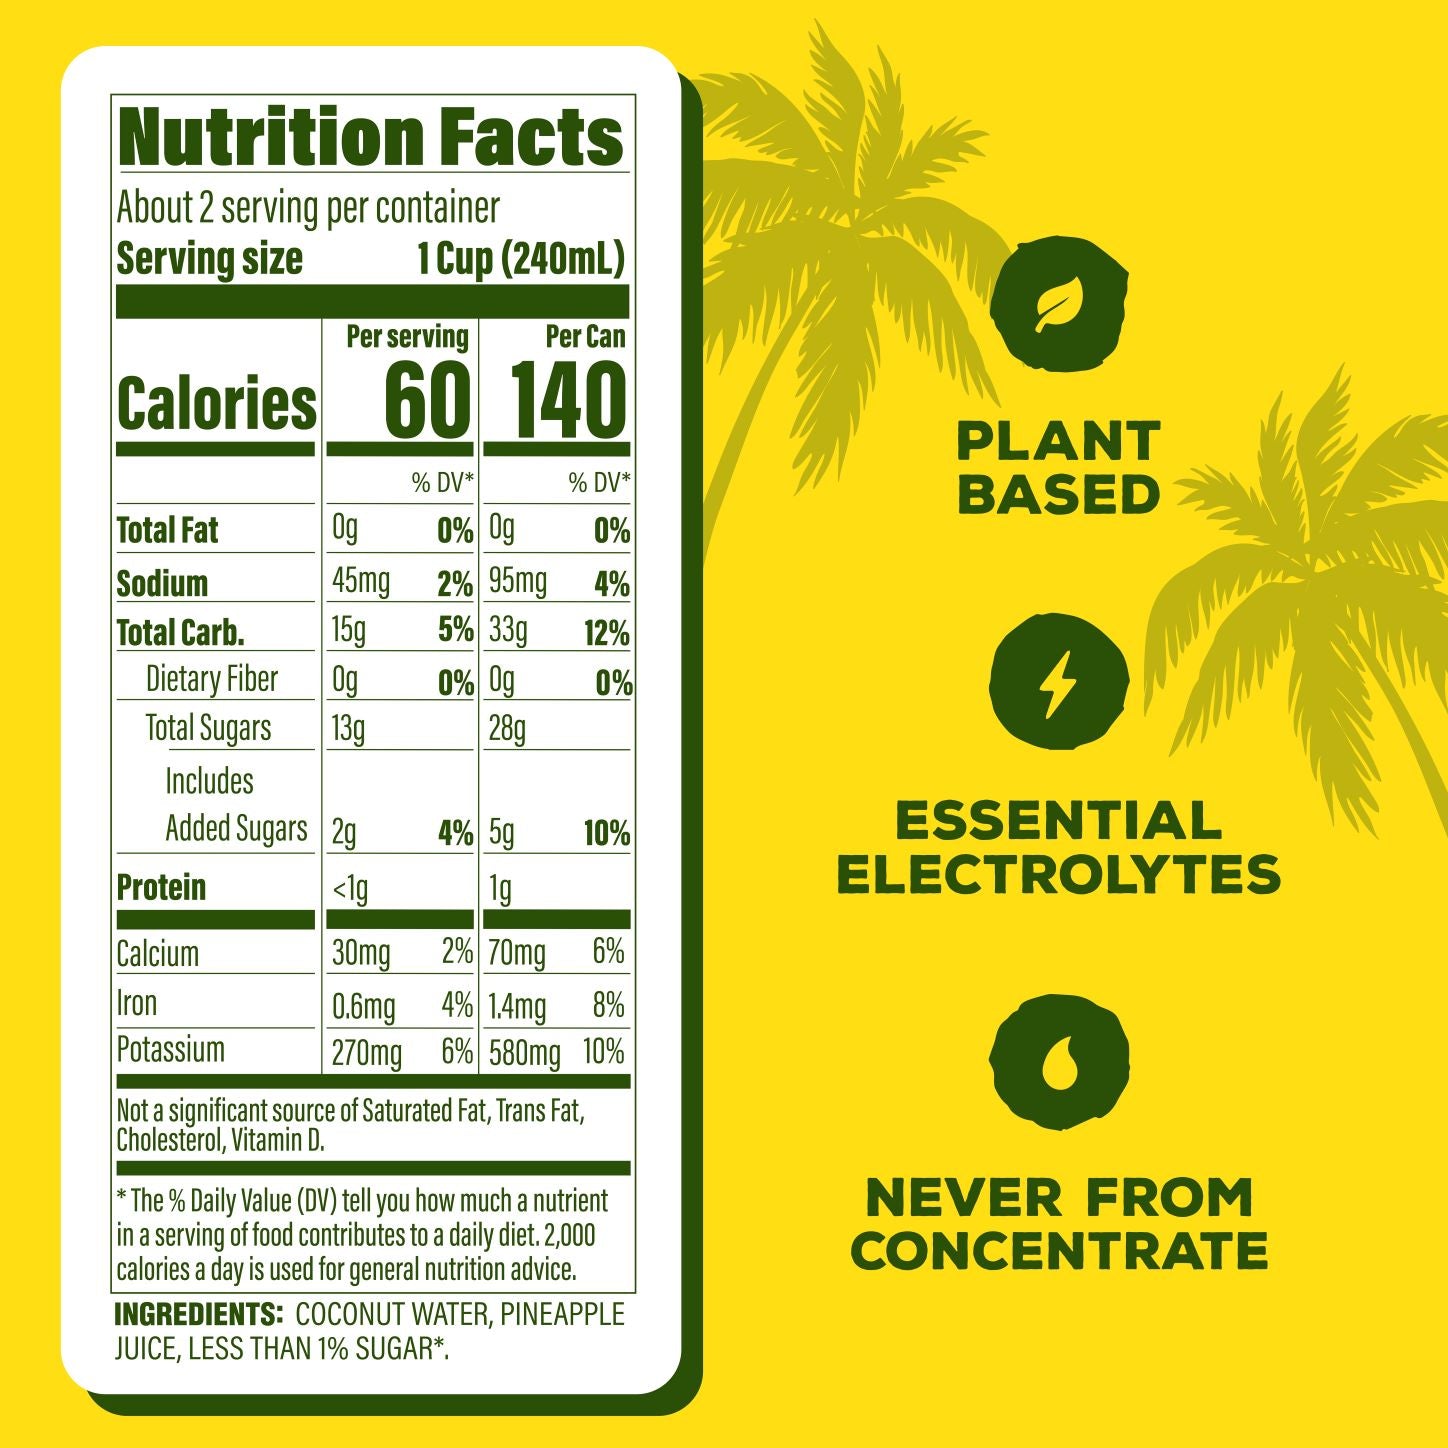 Coconut Water with Pineapple - 17.5 fl oz (12-pack)